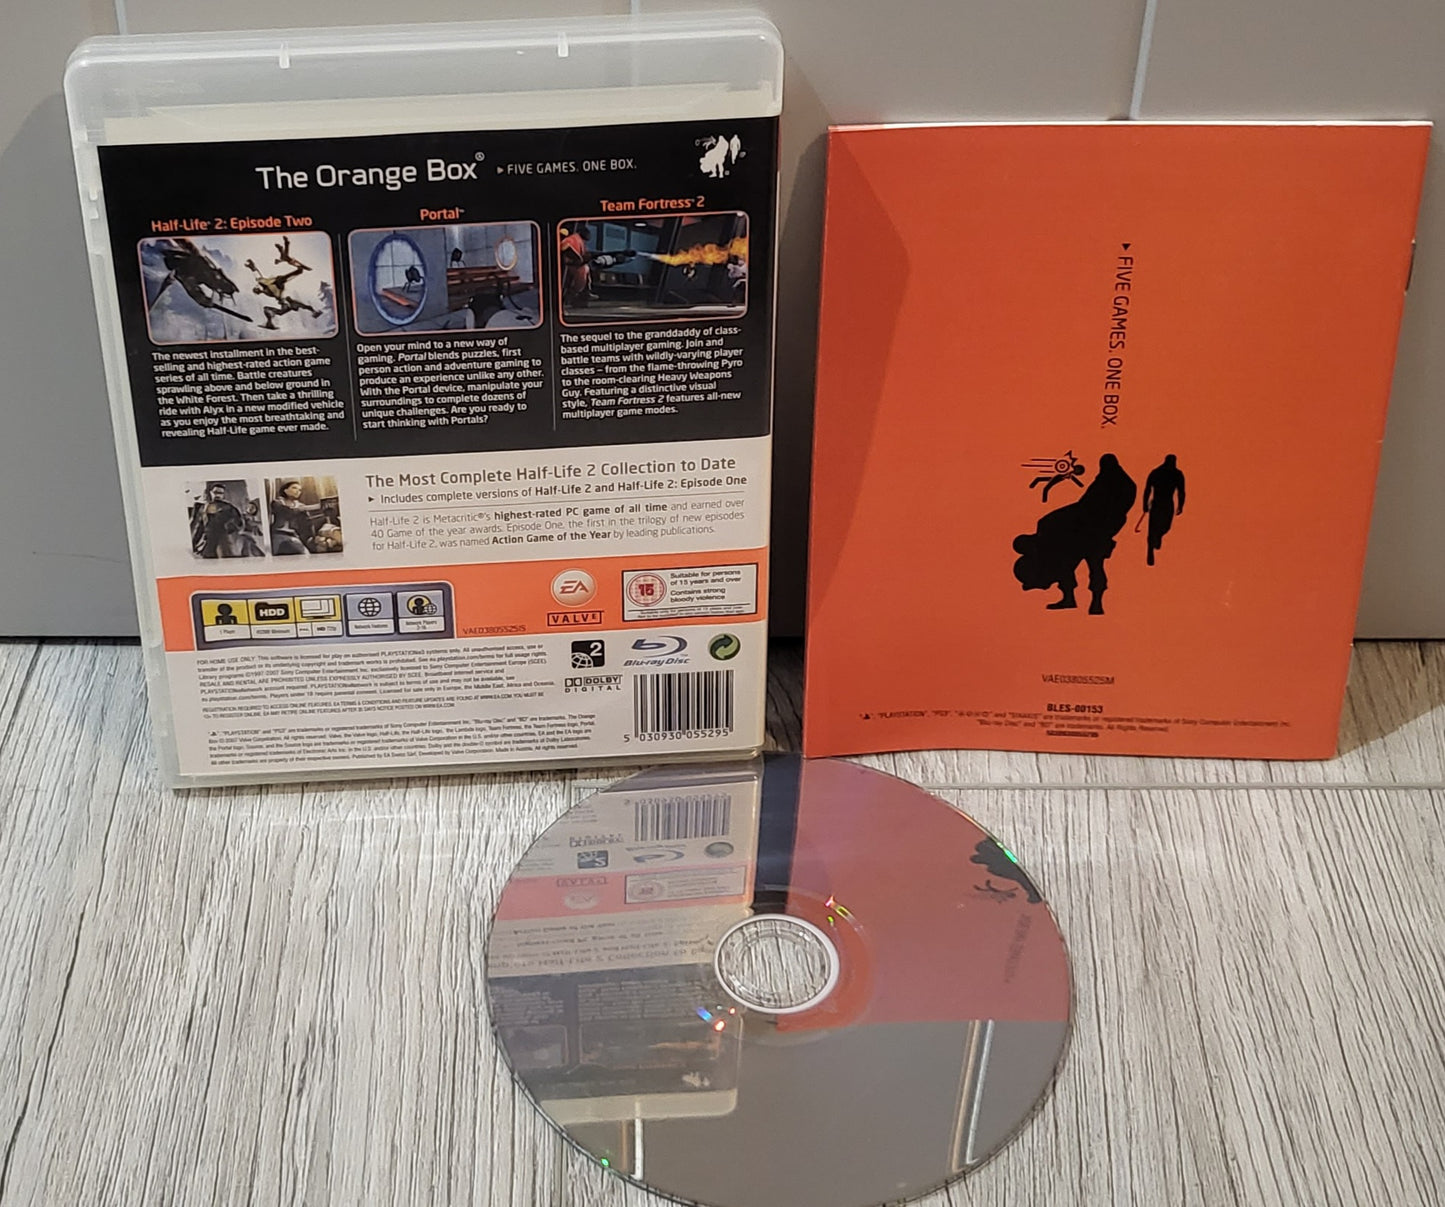 The Orange Box Sony Playstation 3 (PS3) Game